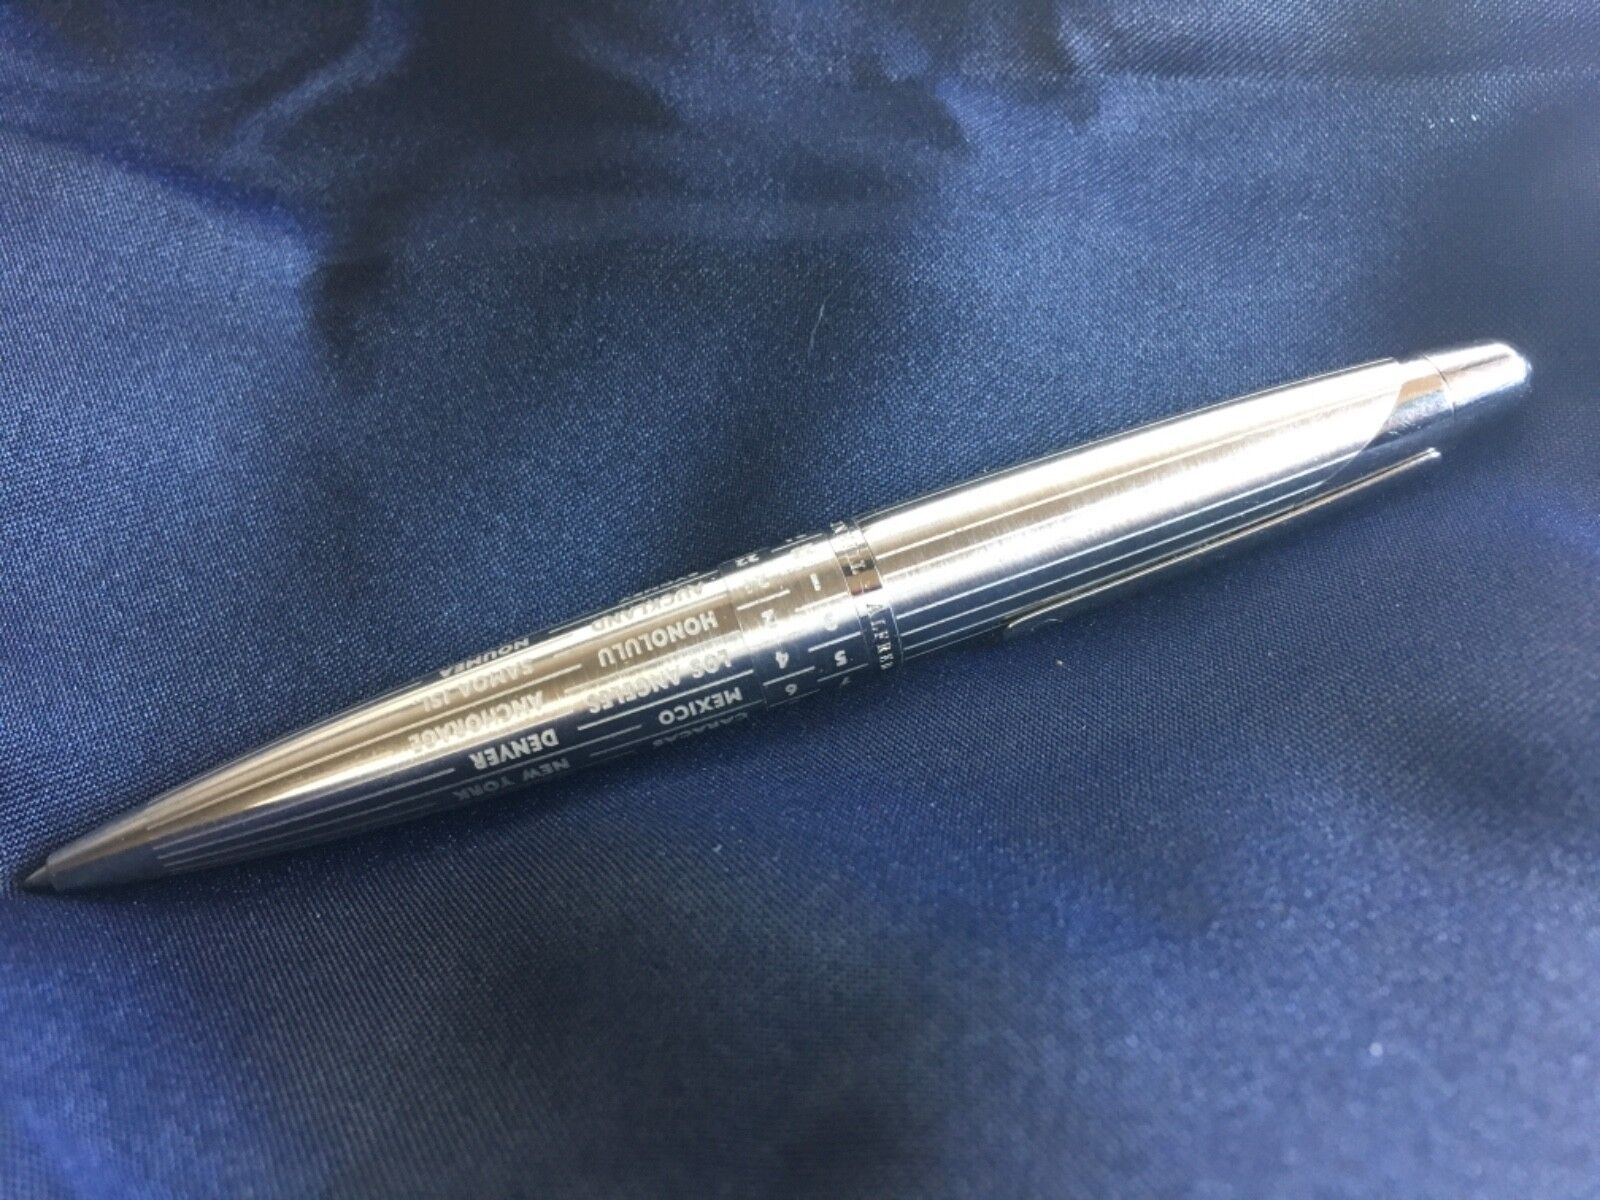 Dunhill AD 2000 G.M.T Limited Edition Ballpoint Pen - EXTREMELY RARE